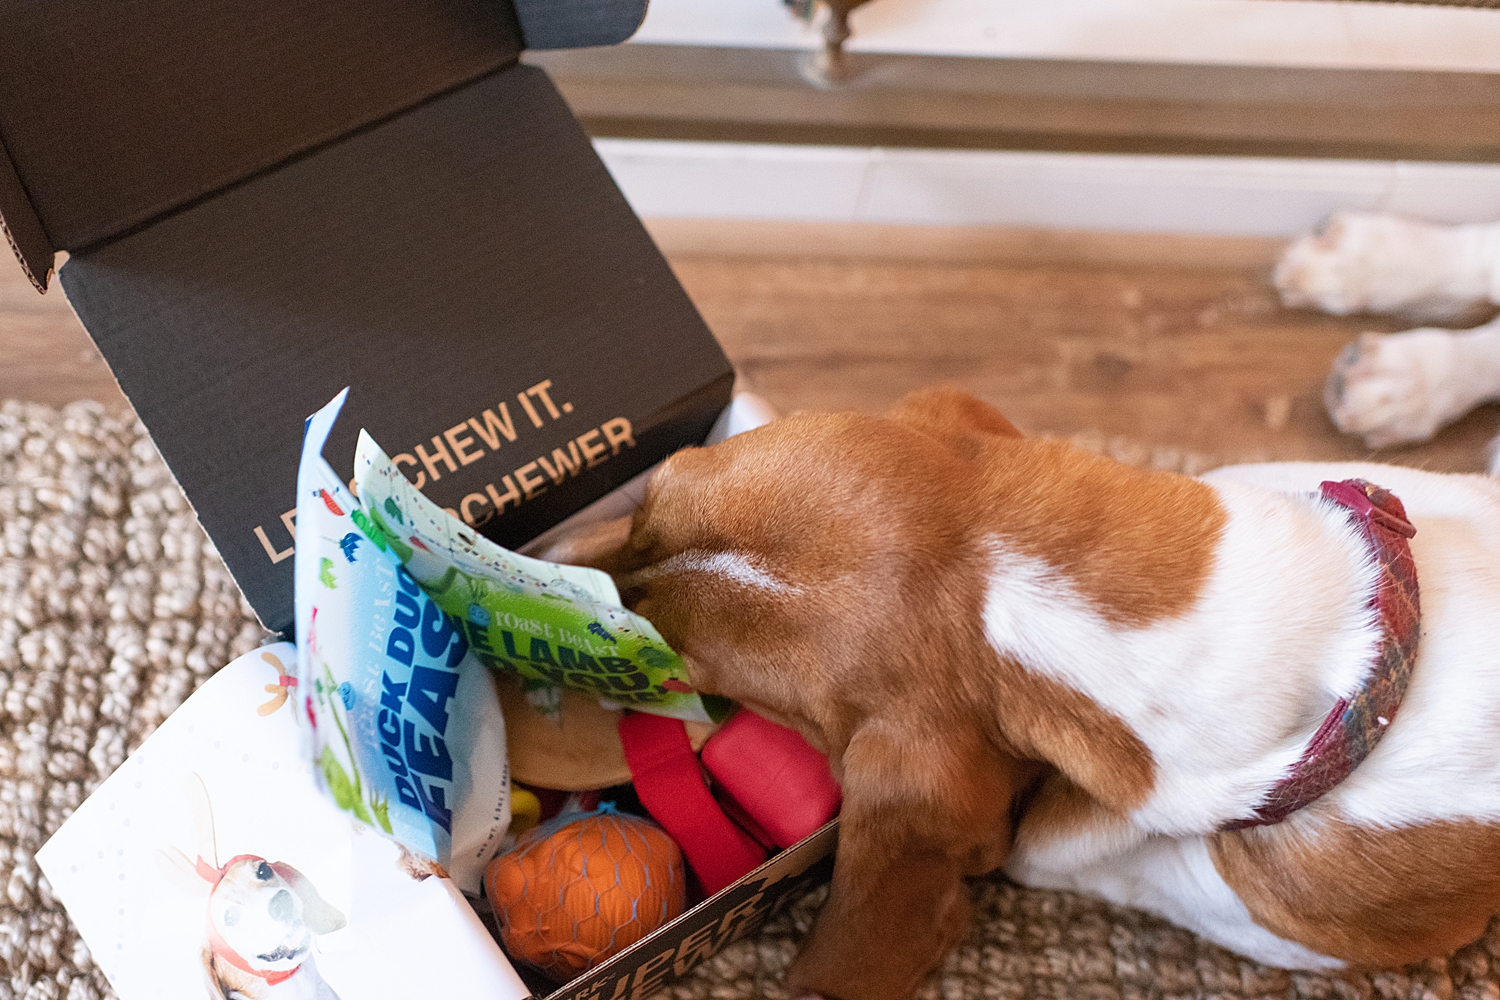 Bark Box Super Chewer Box featured by top Houston lifestyle blog, Fancy Ashley